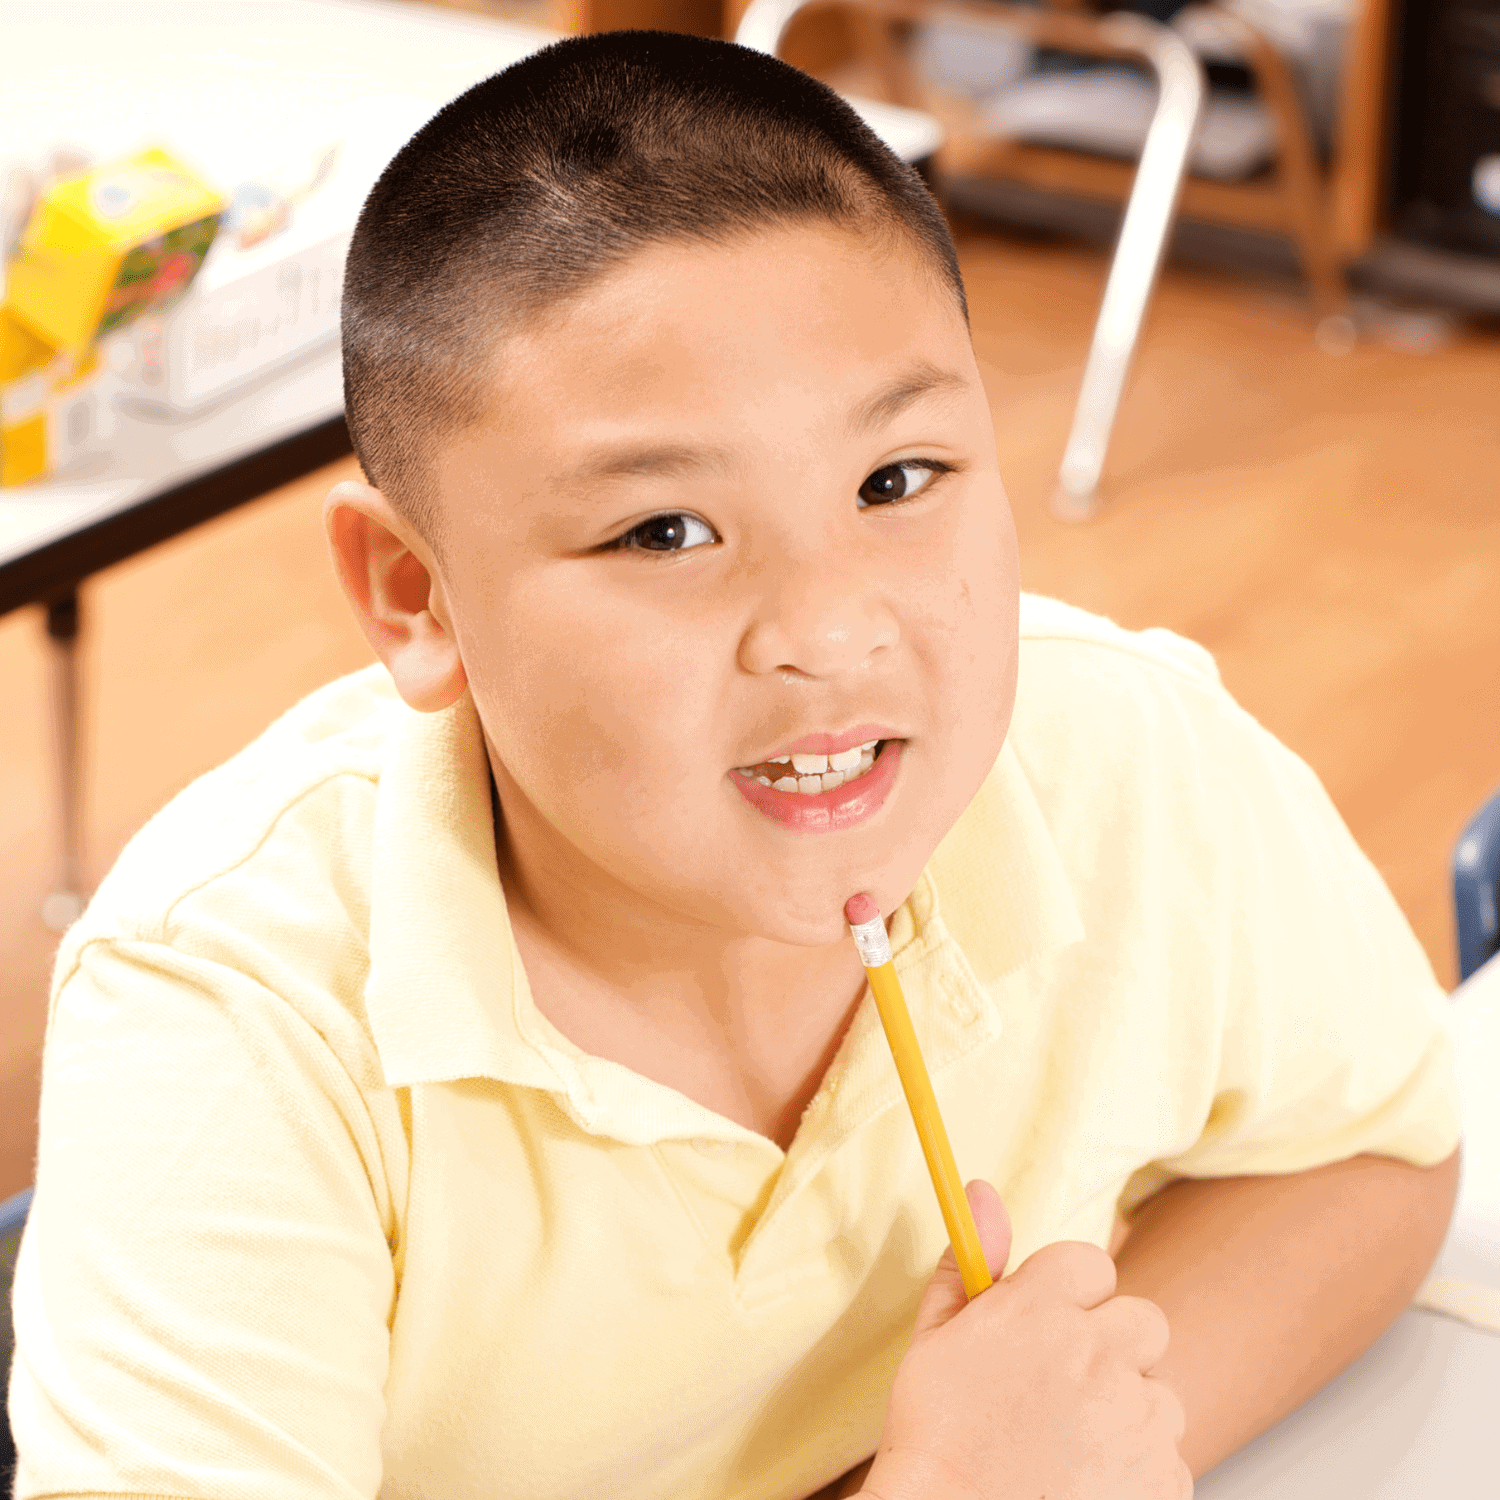 Child sitting at his desk in classroom